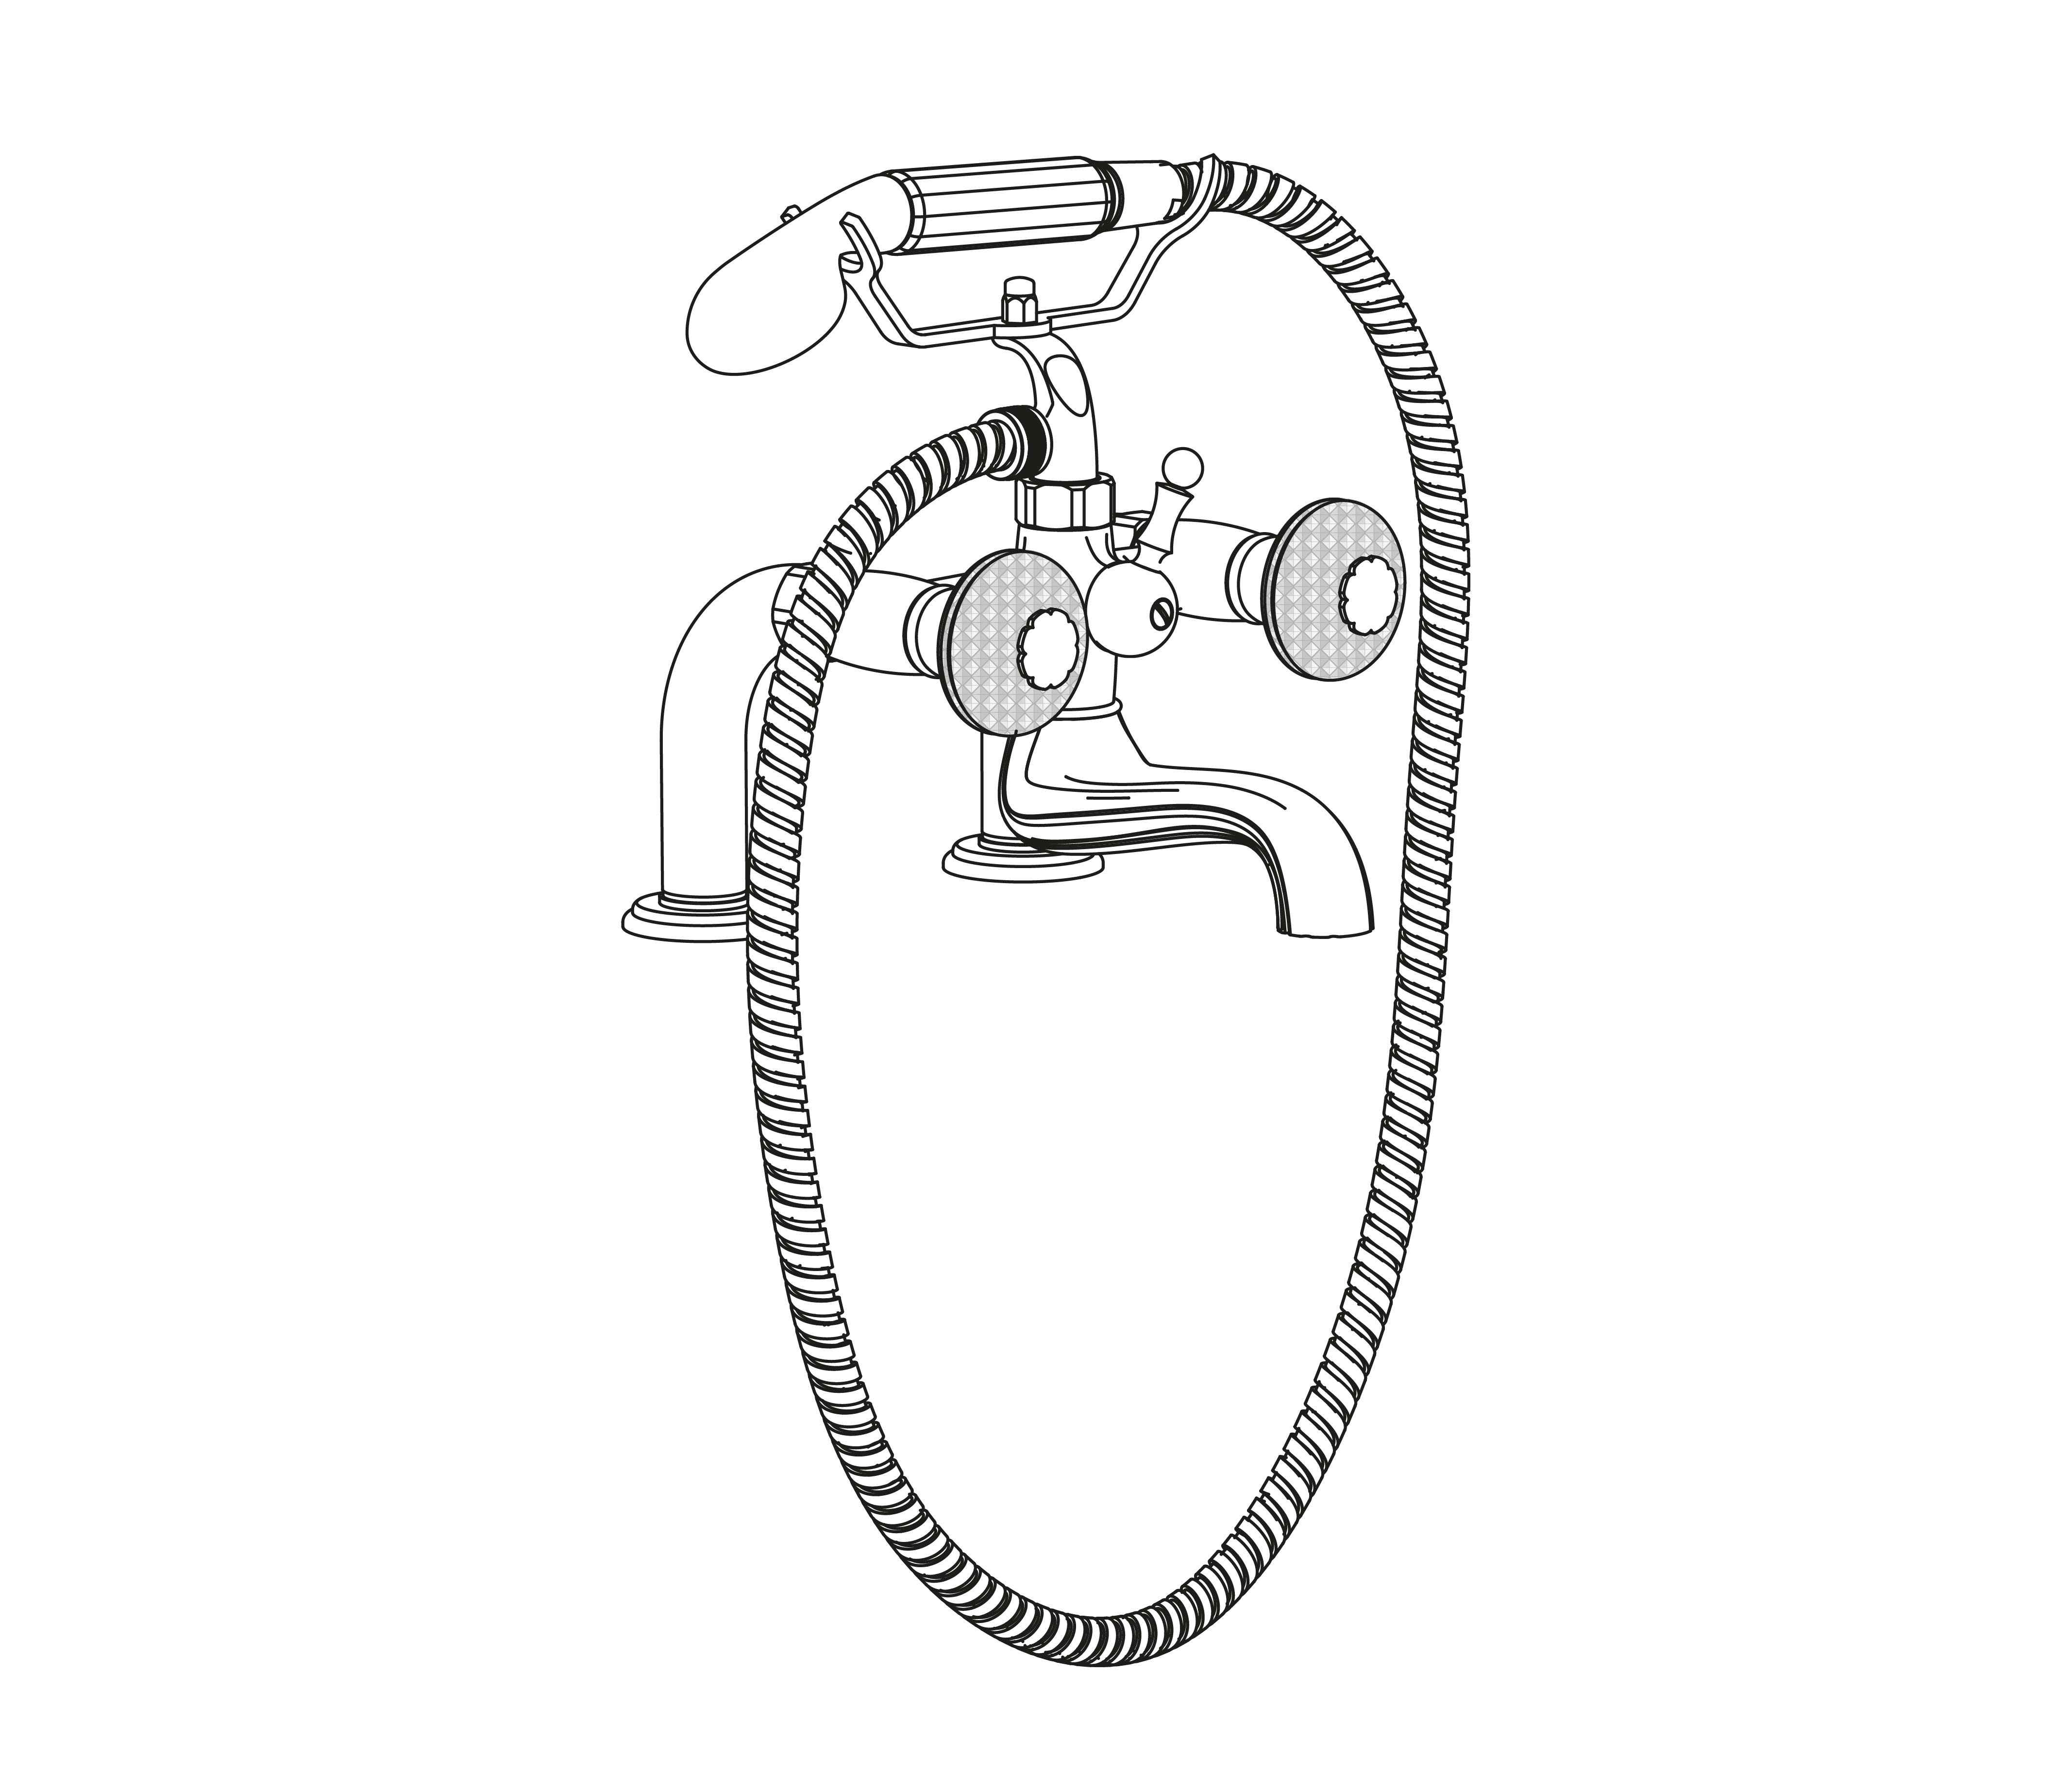 C47-3306 Rim mounted bath and shower mixer